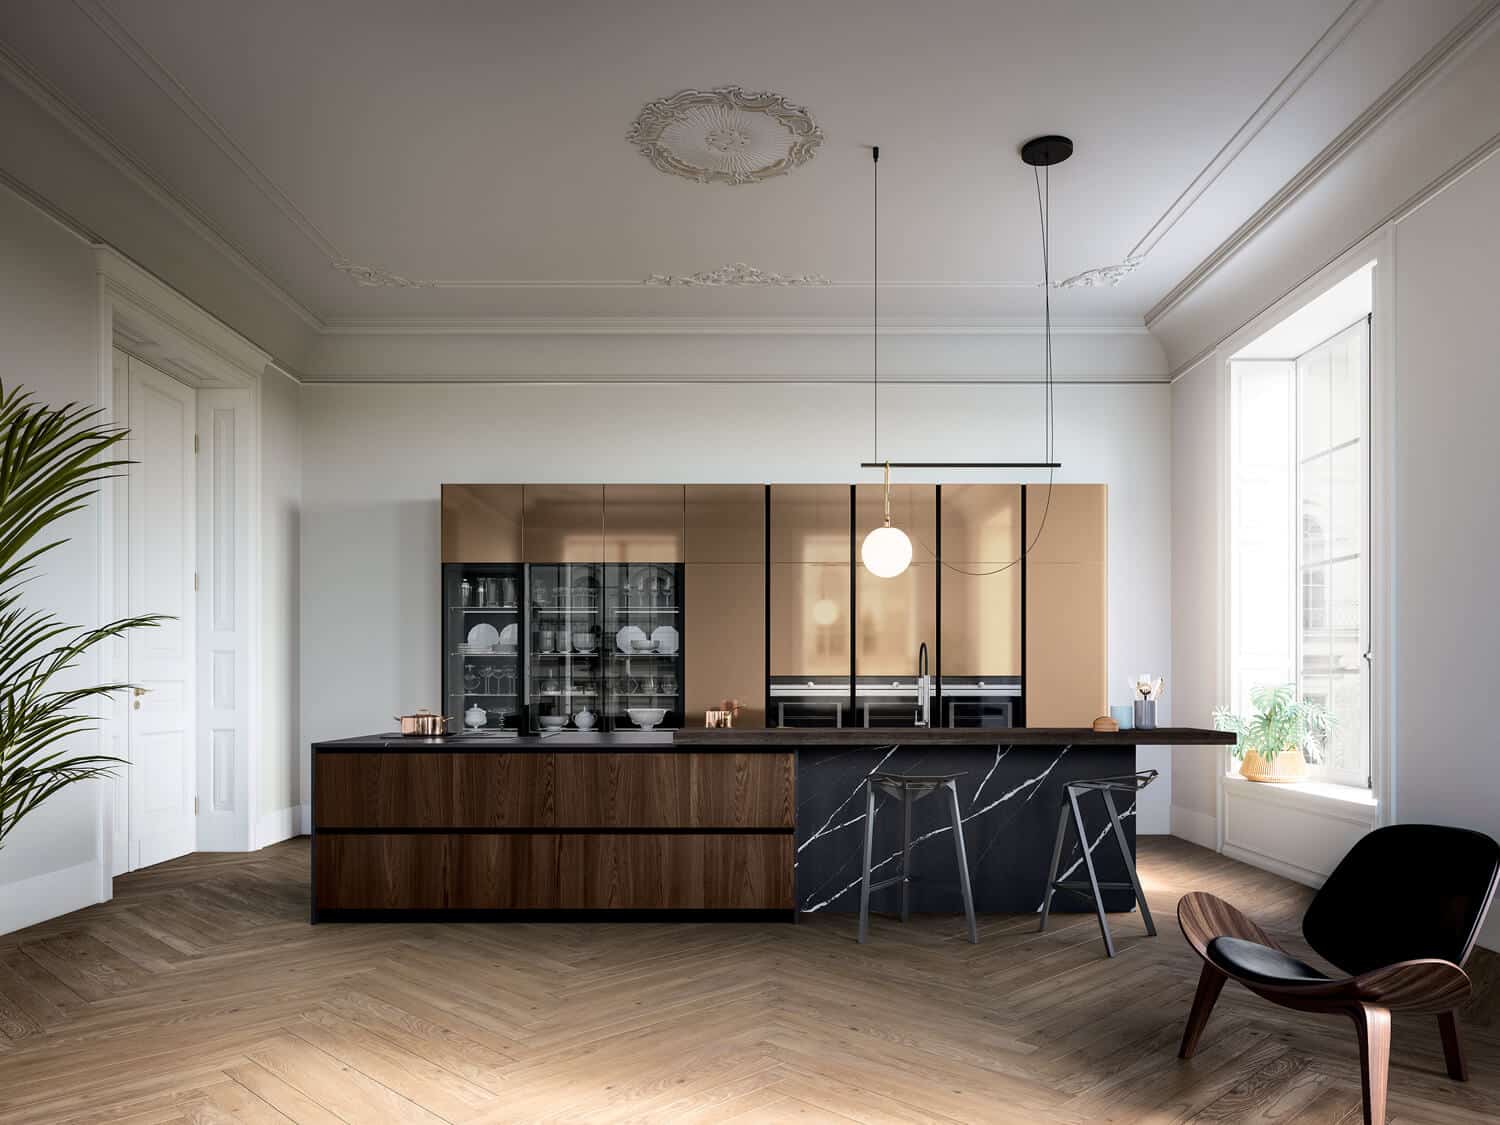 Modern kitchen designs with exclusive finishes